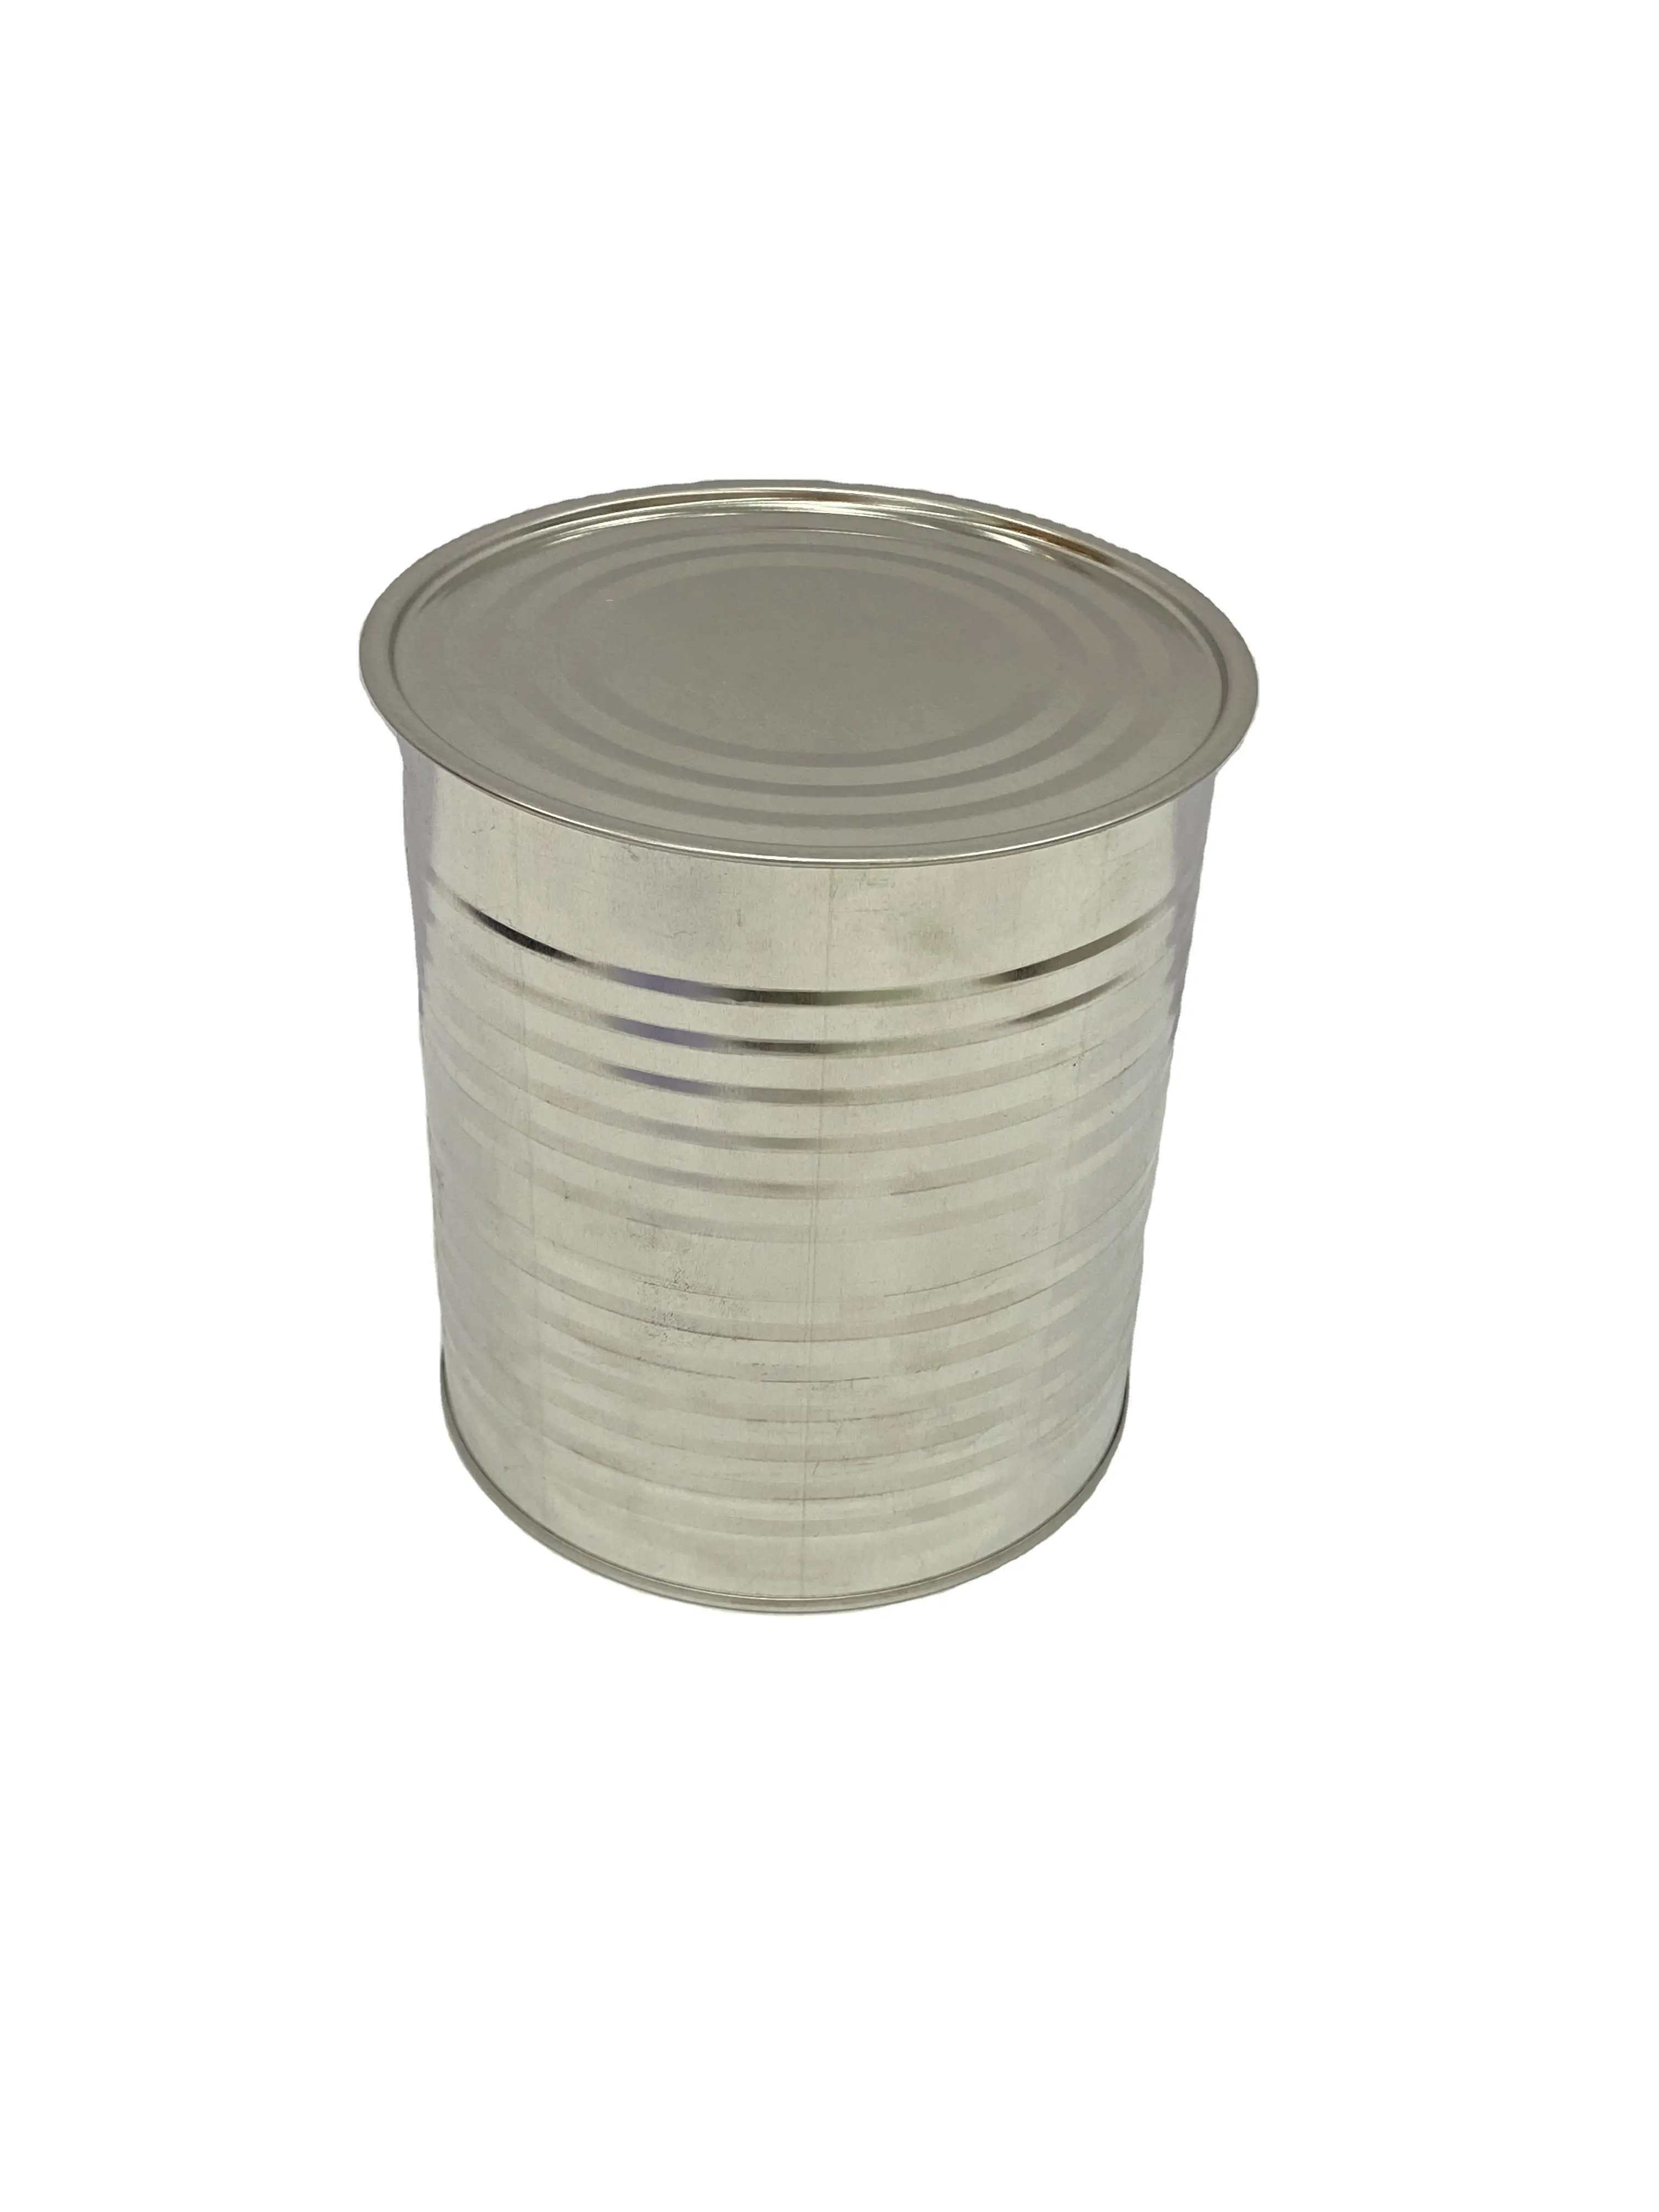 High performance 3L food tin cans for tomato sauce and seasoning powder Open tin cans cigarette packet Small cans